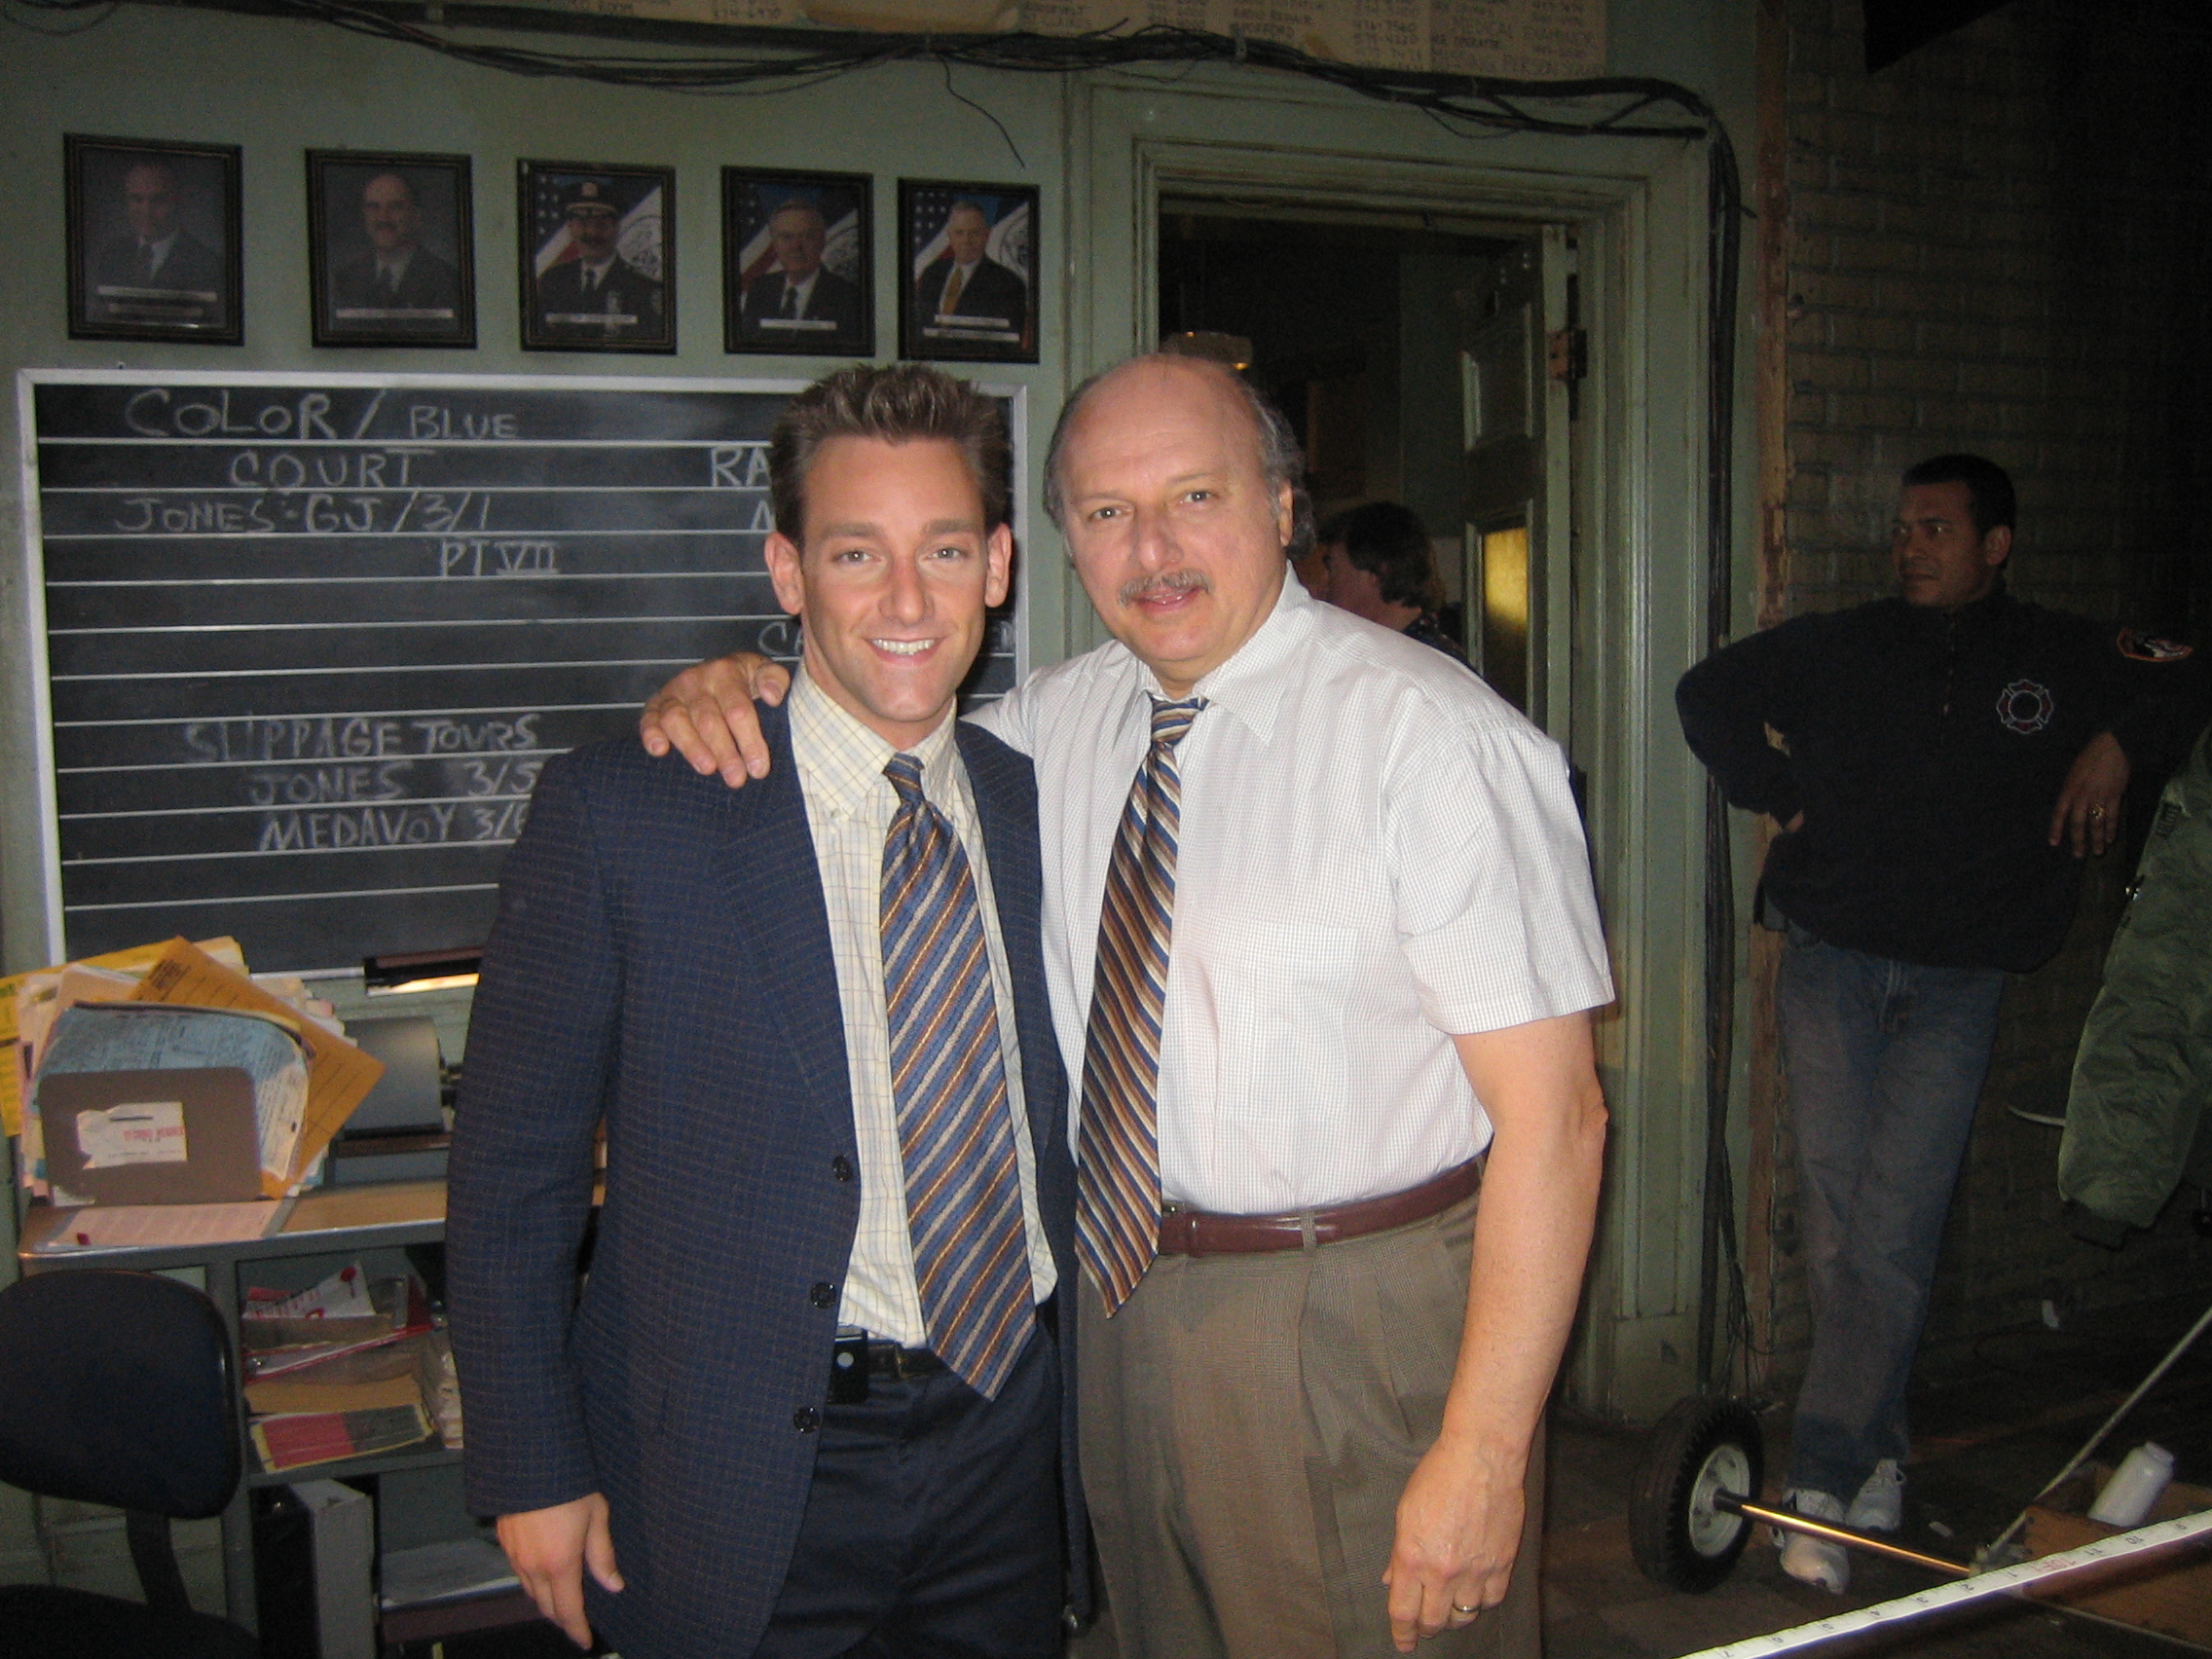 On set of the Series Finale of NYPD Blue in Los Angeles with Dennis Franz, playing the role of Detective Ray Quinn.